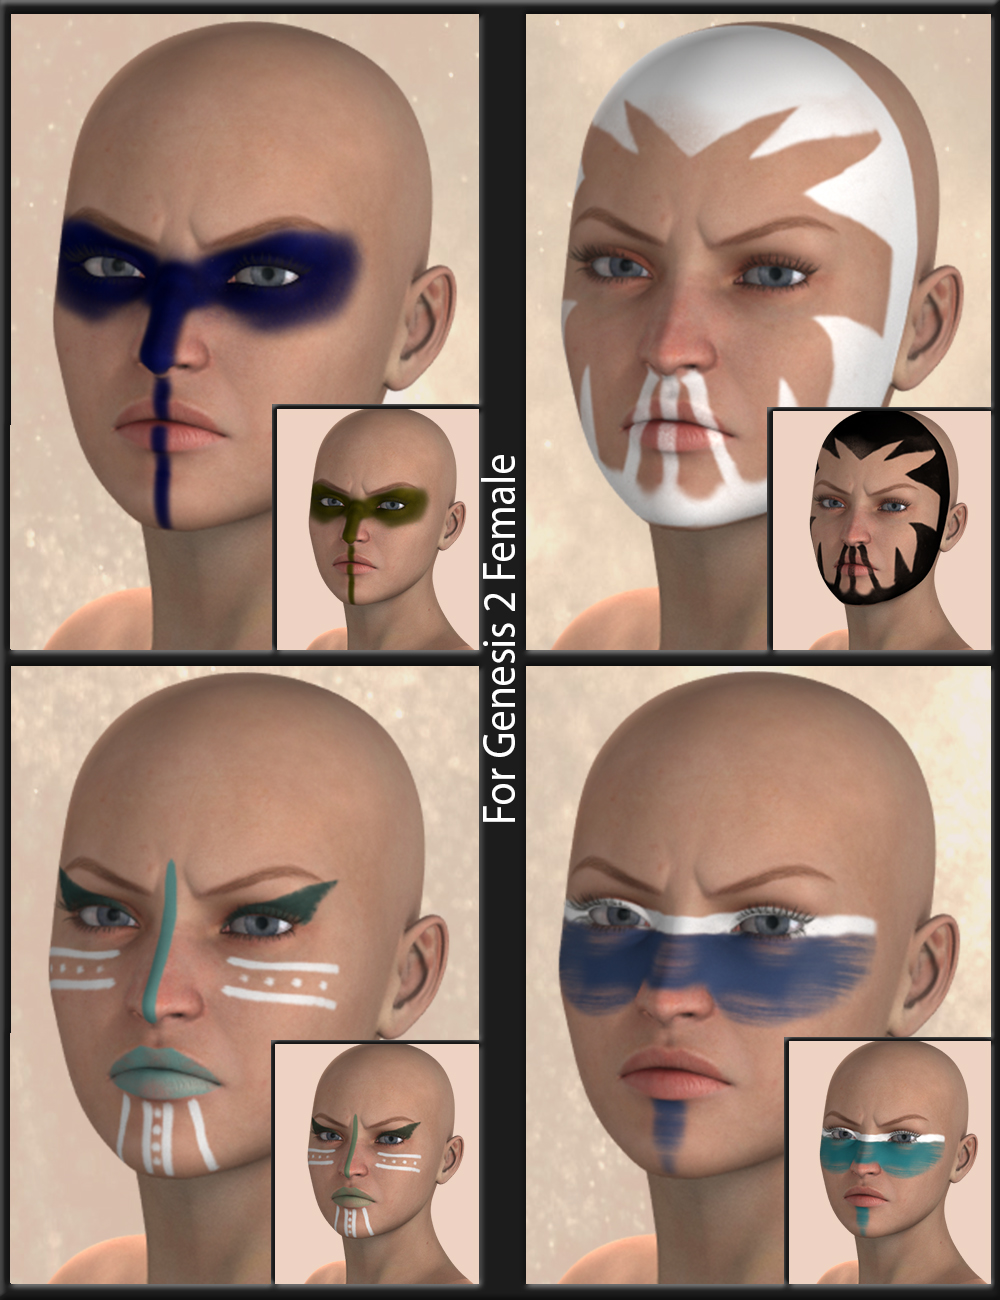 Warrior Make-up for Genesis 2 Female(s) by: Neikdian, 3D Models by Daz 3D